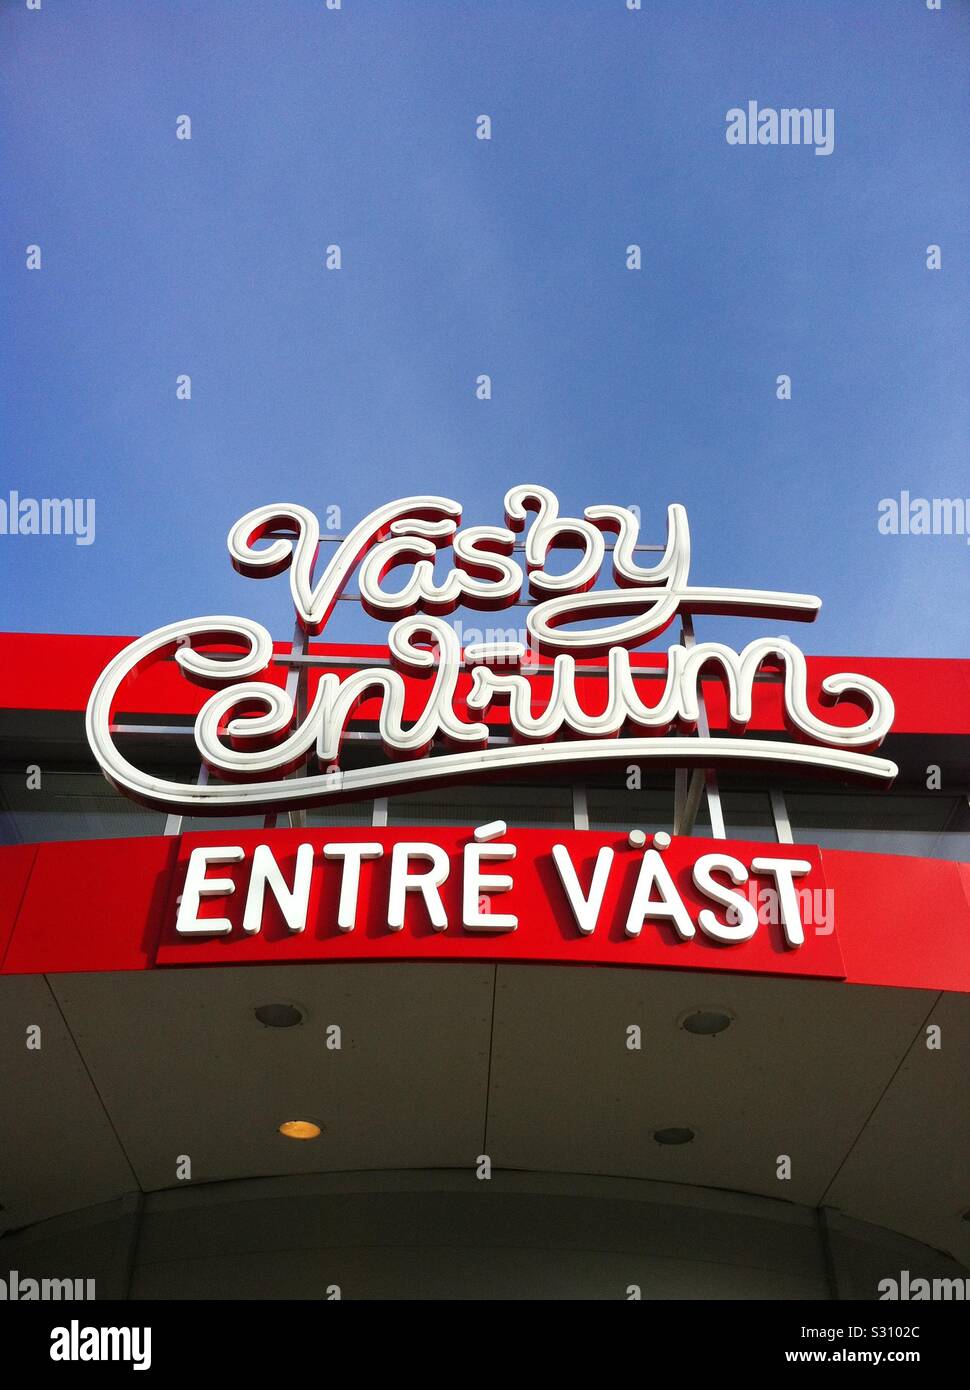 Upplandsvasby (upplands vasby) centrum signage colour conteast and typeface design outside of the west entrance of the shopping mall. Stock Photo